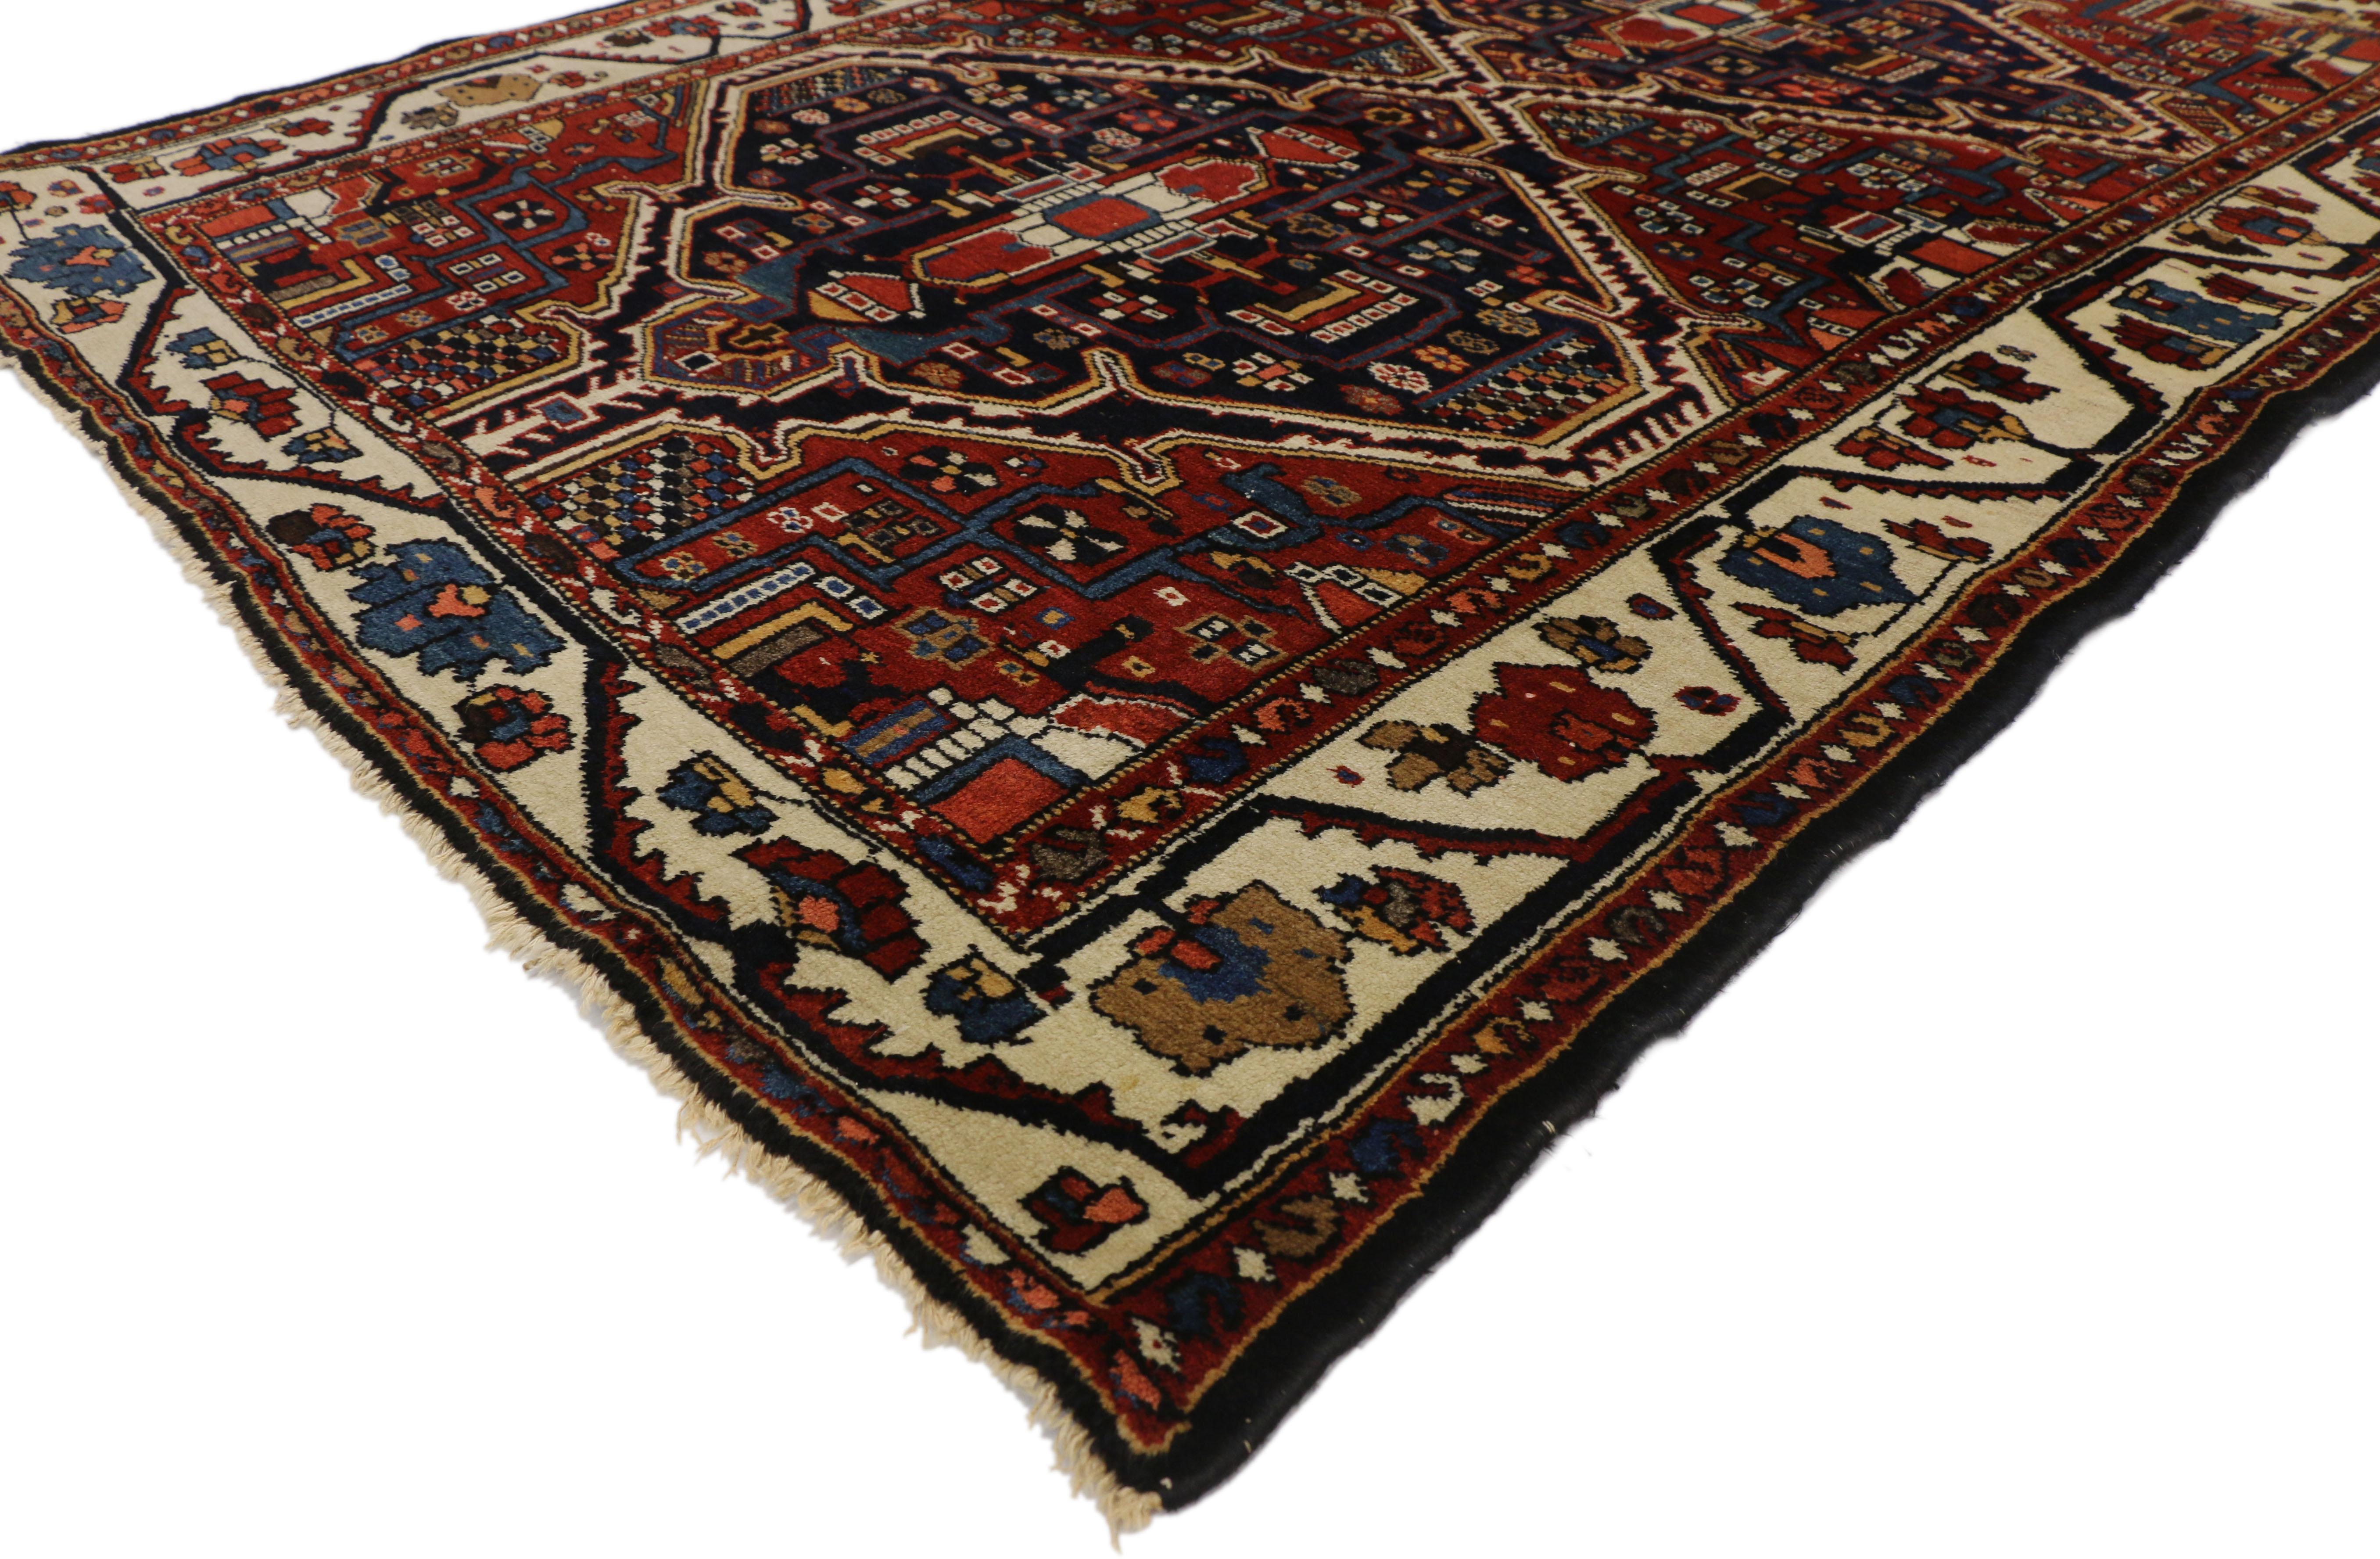 73315 Antique Persian Bakhtiari rug with Traditional Modern style. Rustic and refined, this hand knotted wool antique Persian Bakhtiari rug with traditional modern style features a double lozenge medallion surrounded by all-over geometric pattern on